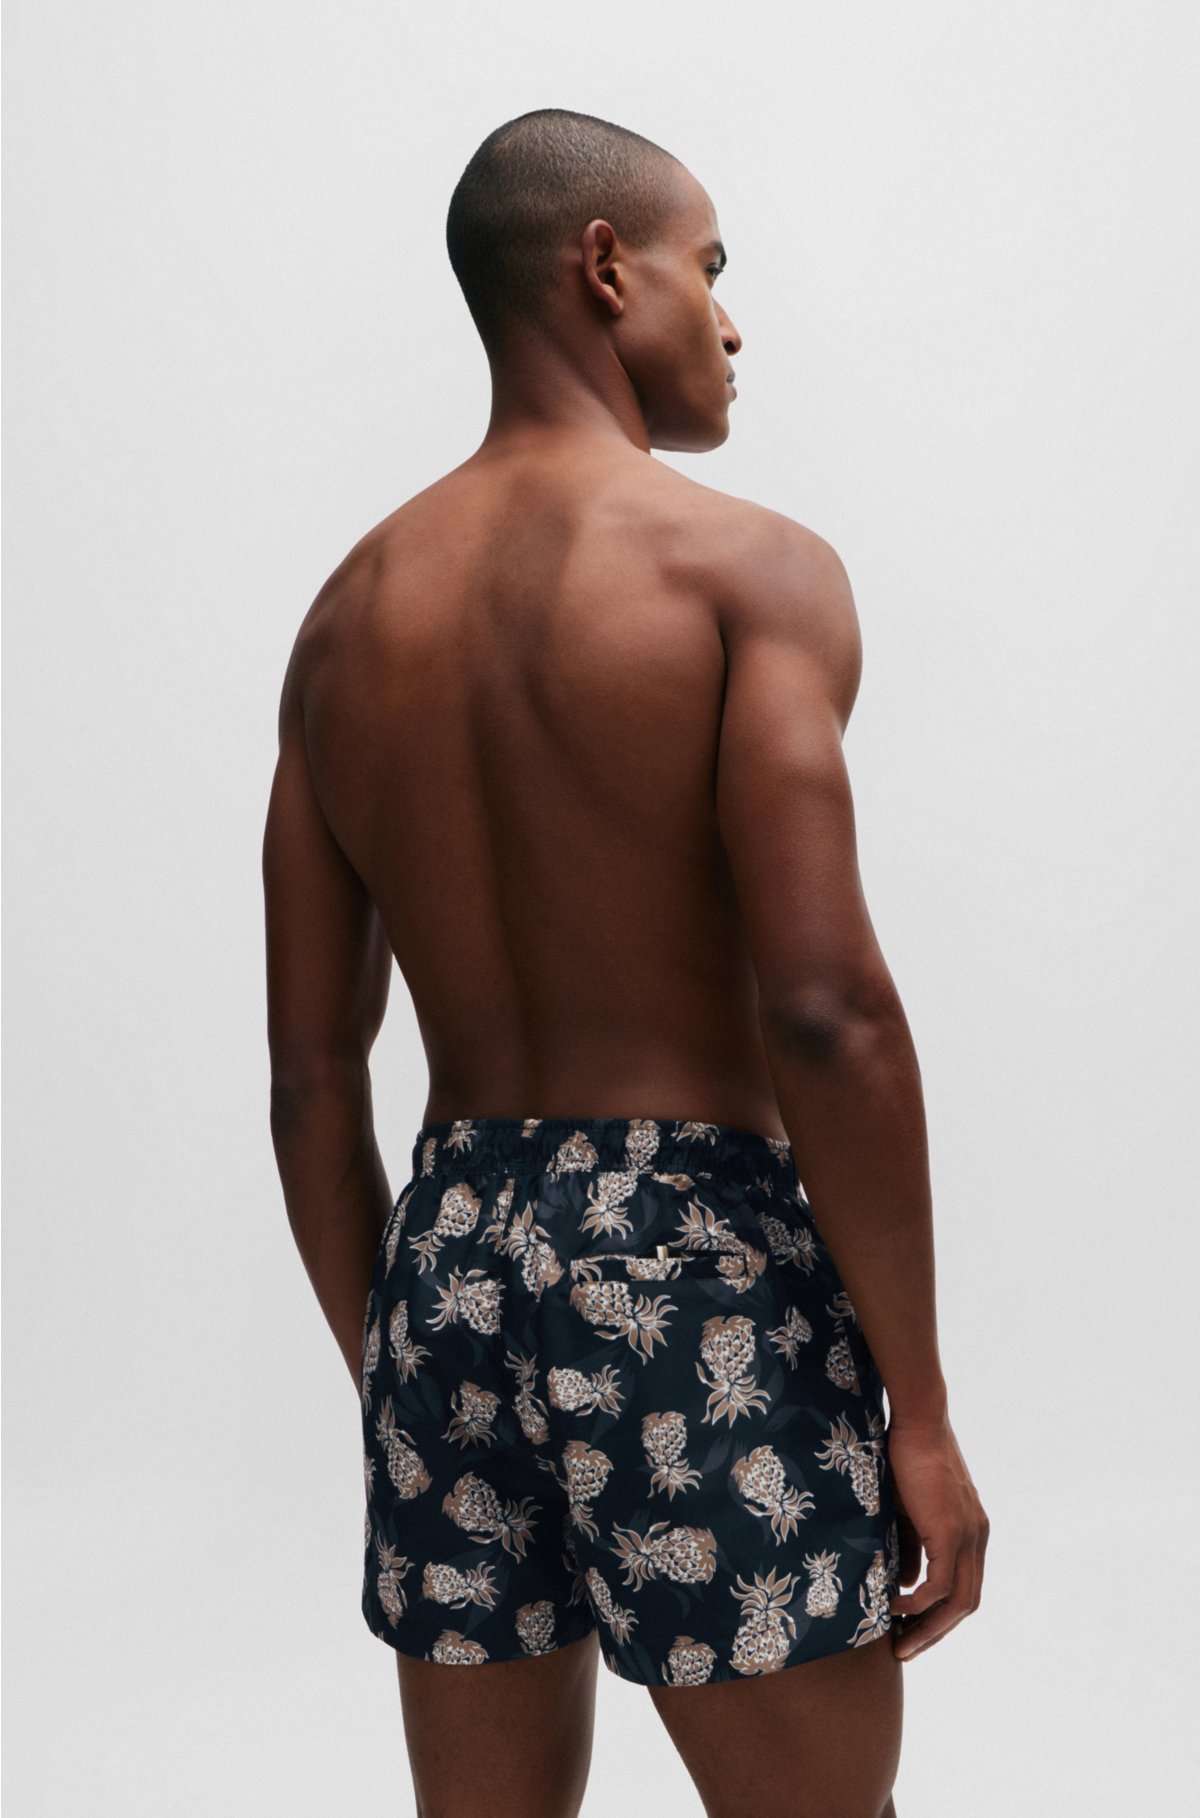 Fully lined swim shorts with pineapple motif, Black